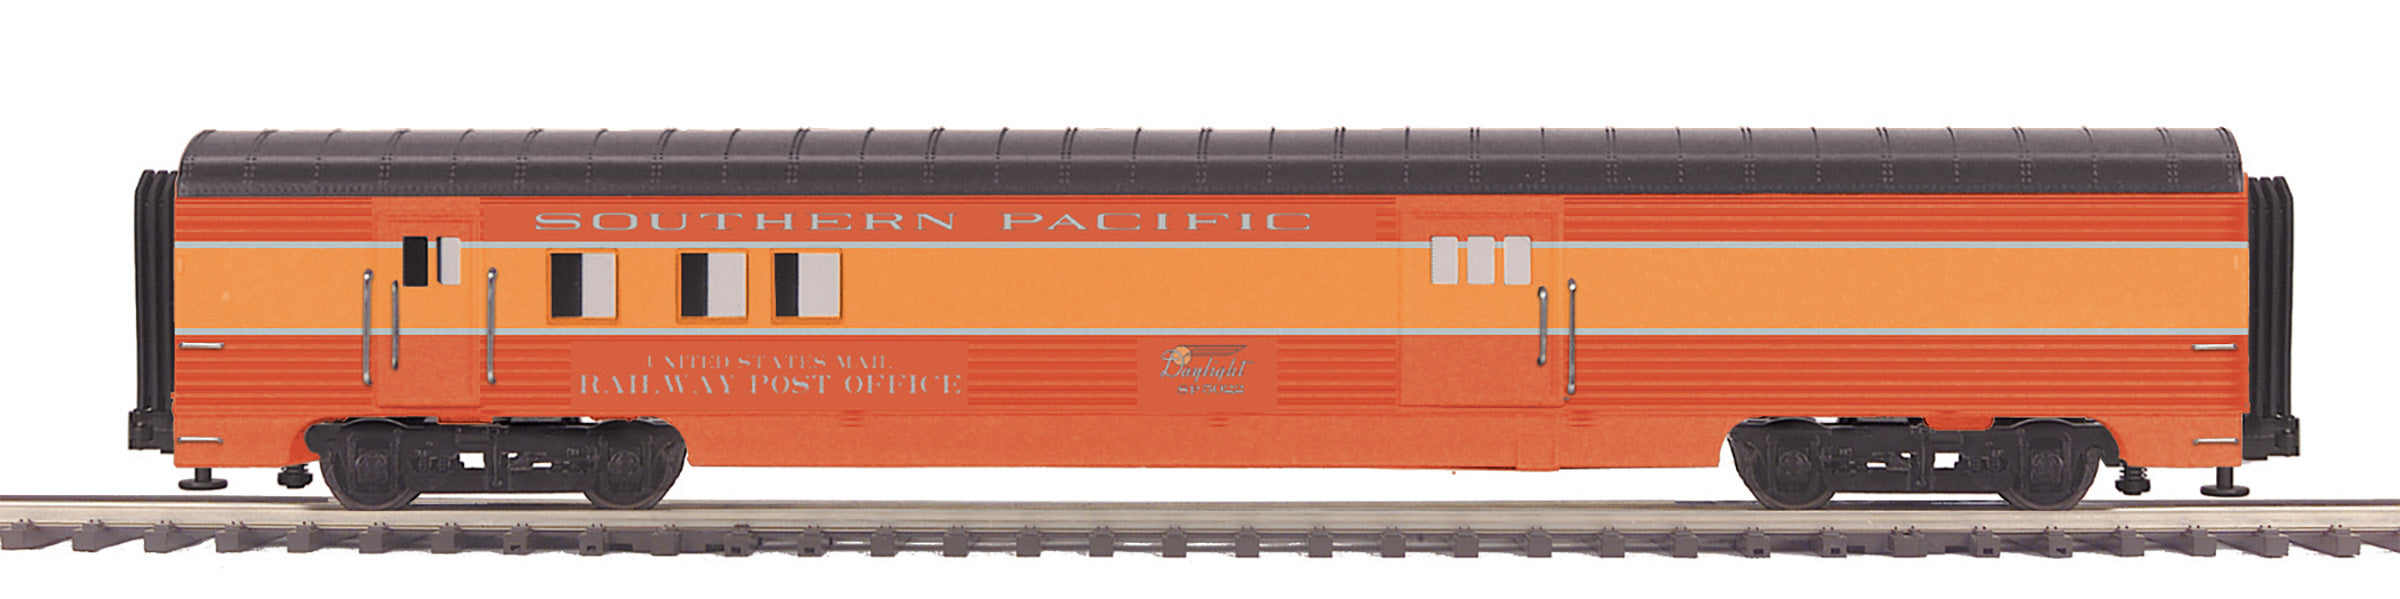 MTH 20-64241 - 70’ Streamlined RPO Passenger Car "Southern Pacific" (Daylight) Smooth Sided